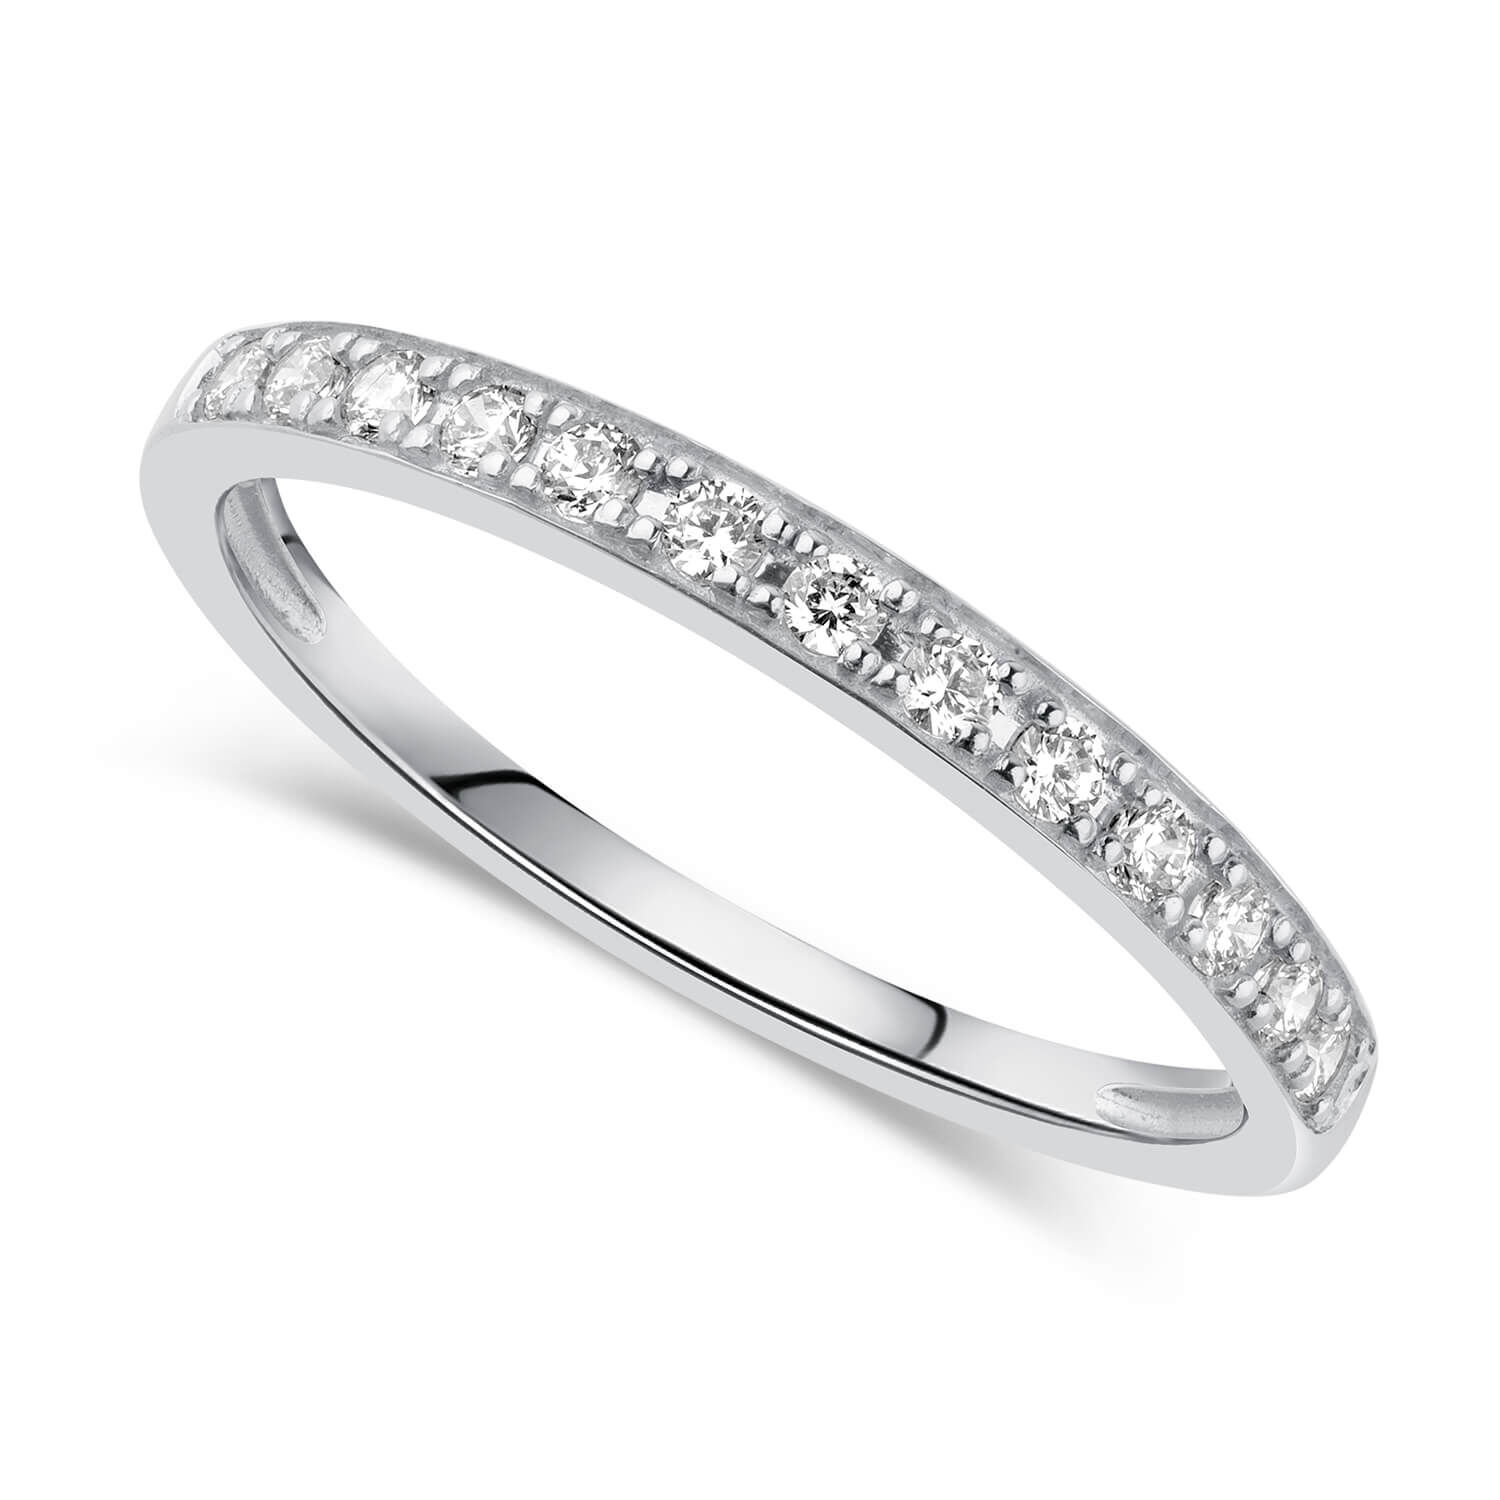 1 CT. T.W. Diamond Engagement Ring in 14K White Gold | Zales Outlet